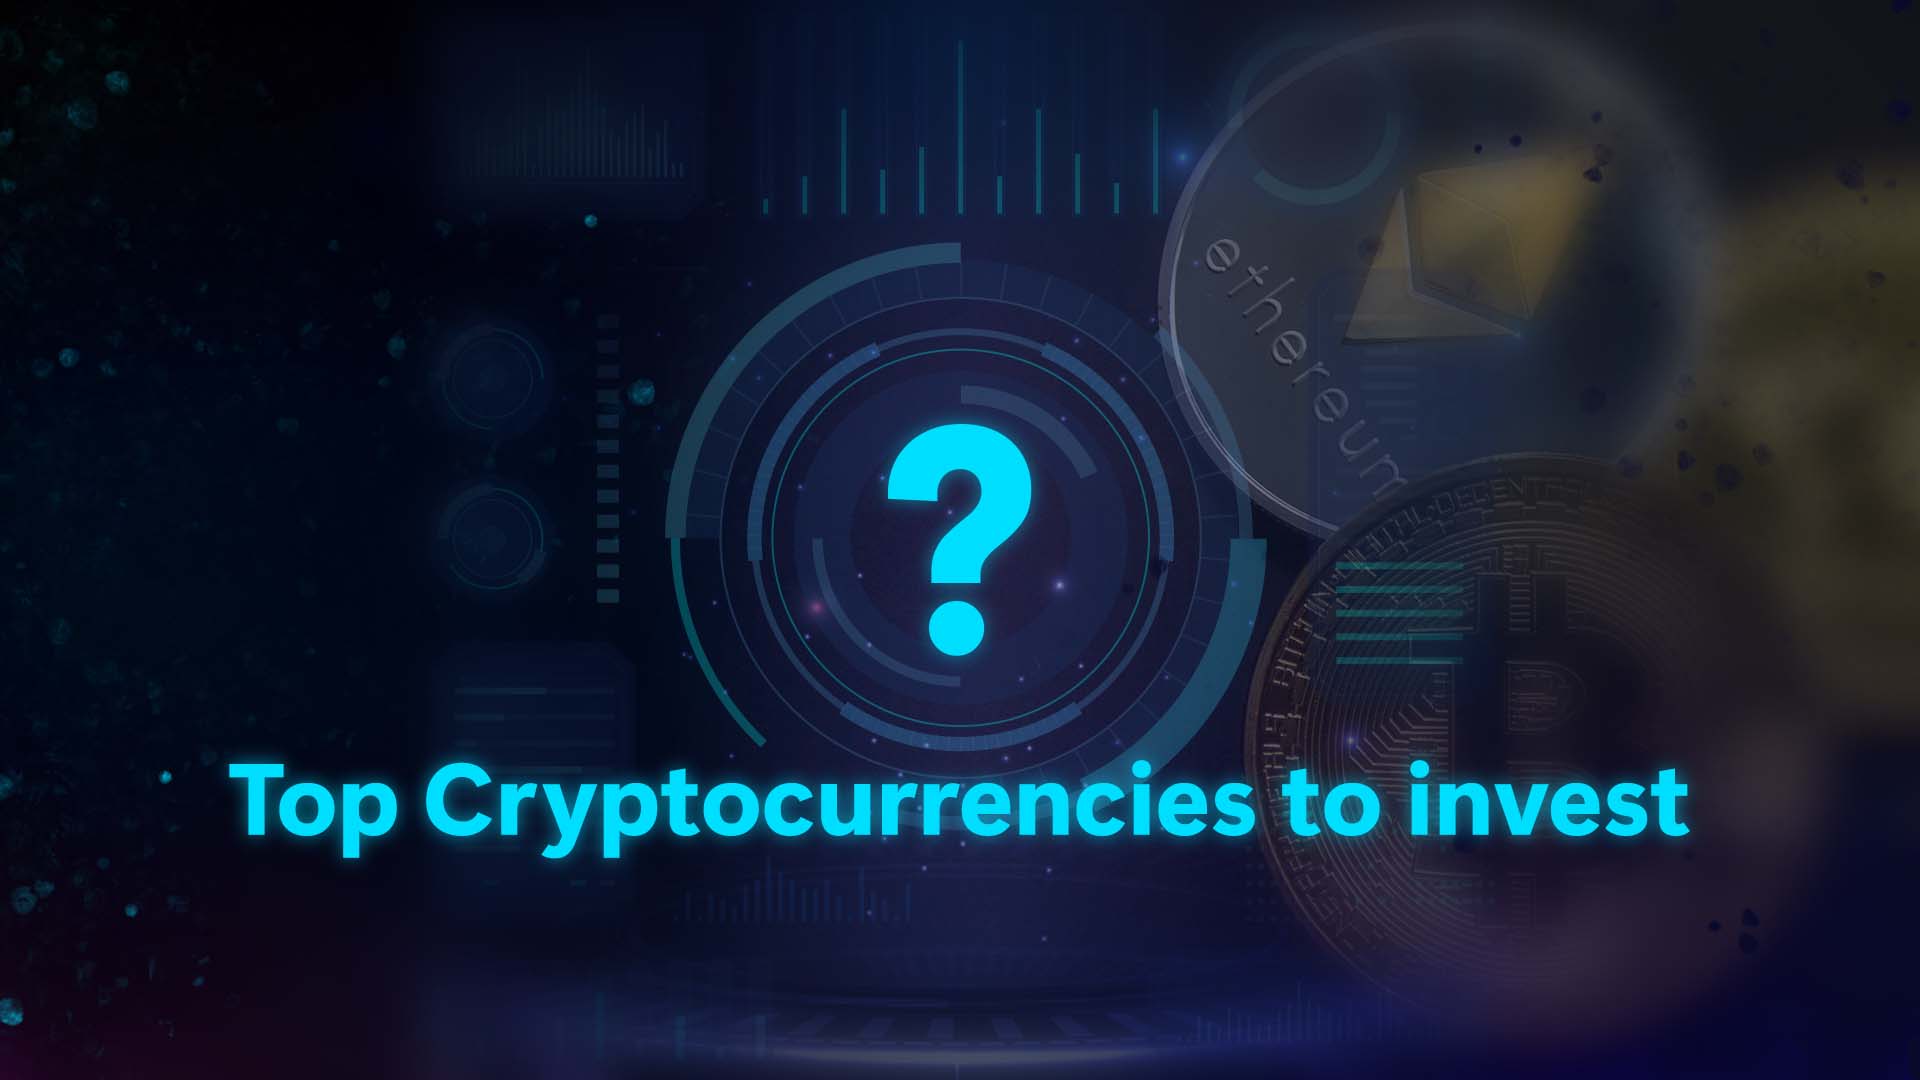 What are the top Cryptocurrencies to invest?